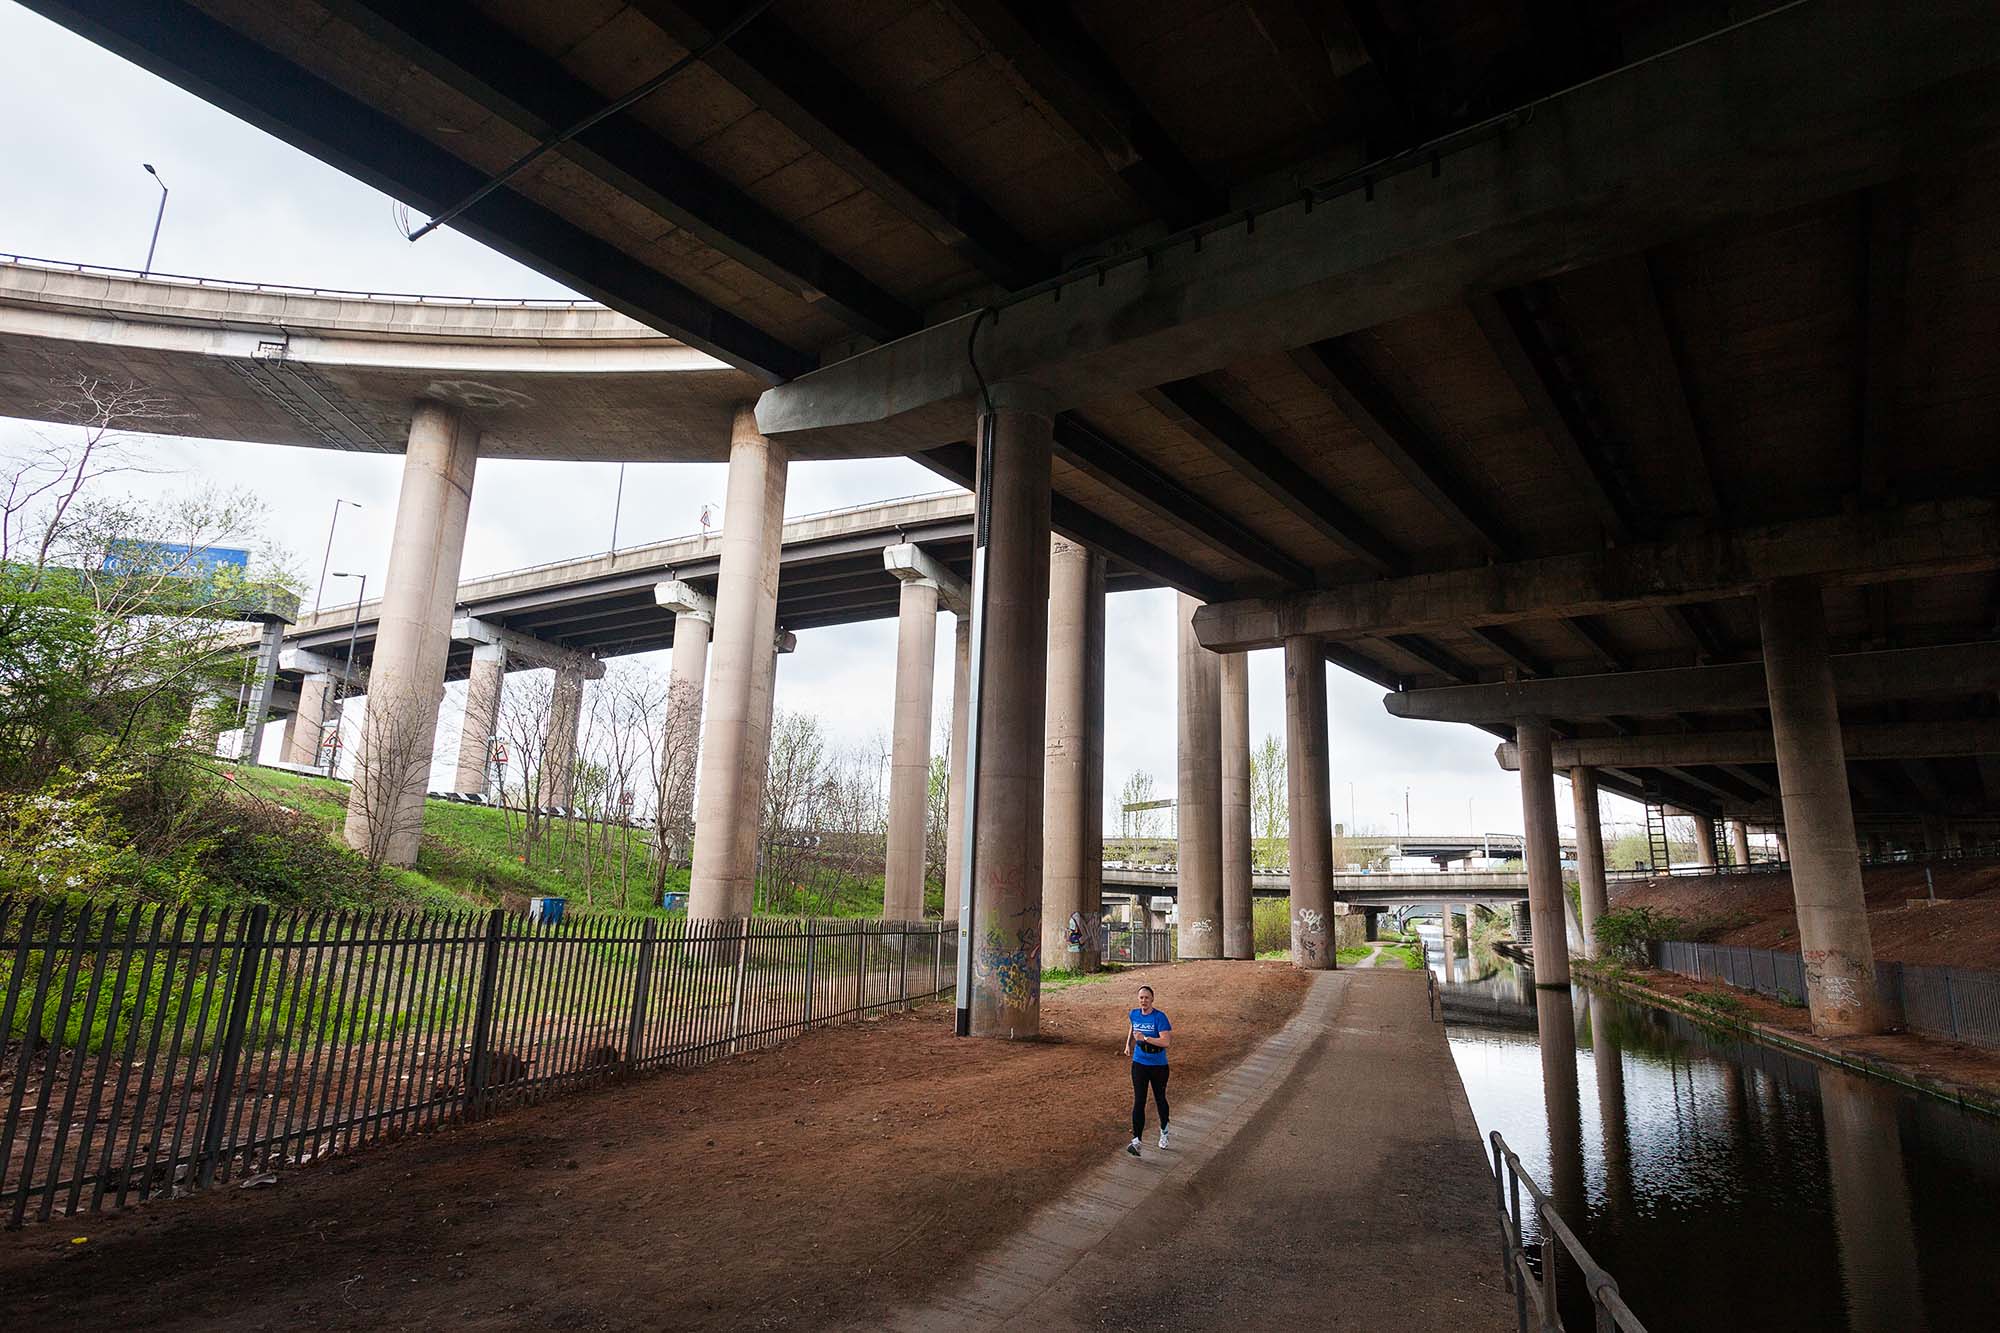  Underneath the Gravelly Hill Interchange on the M6 at Birmingham - better known as Spaghetti Junction 